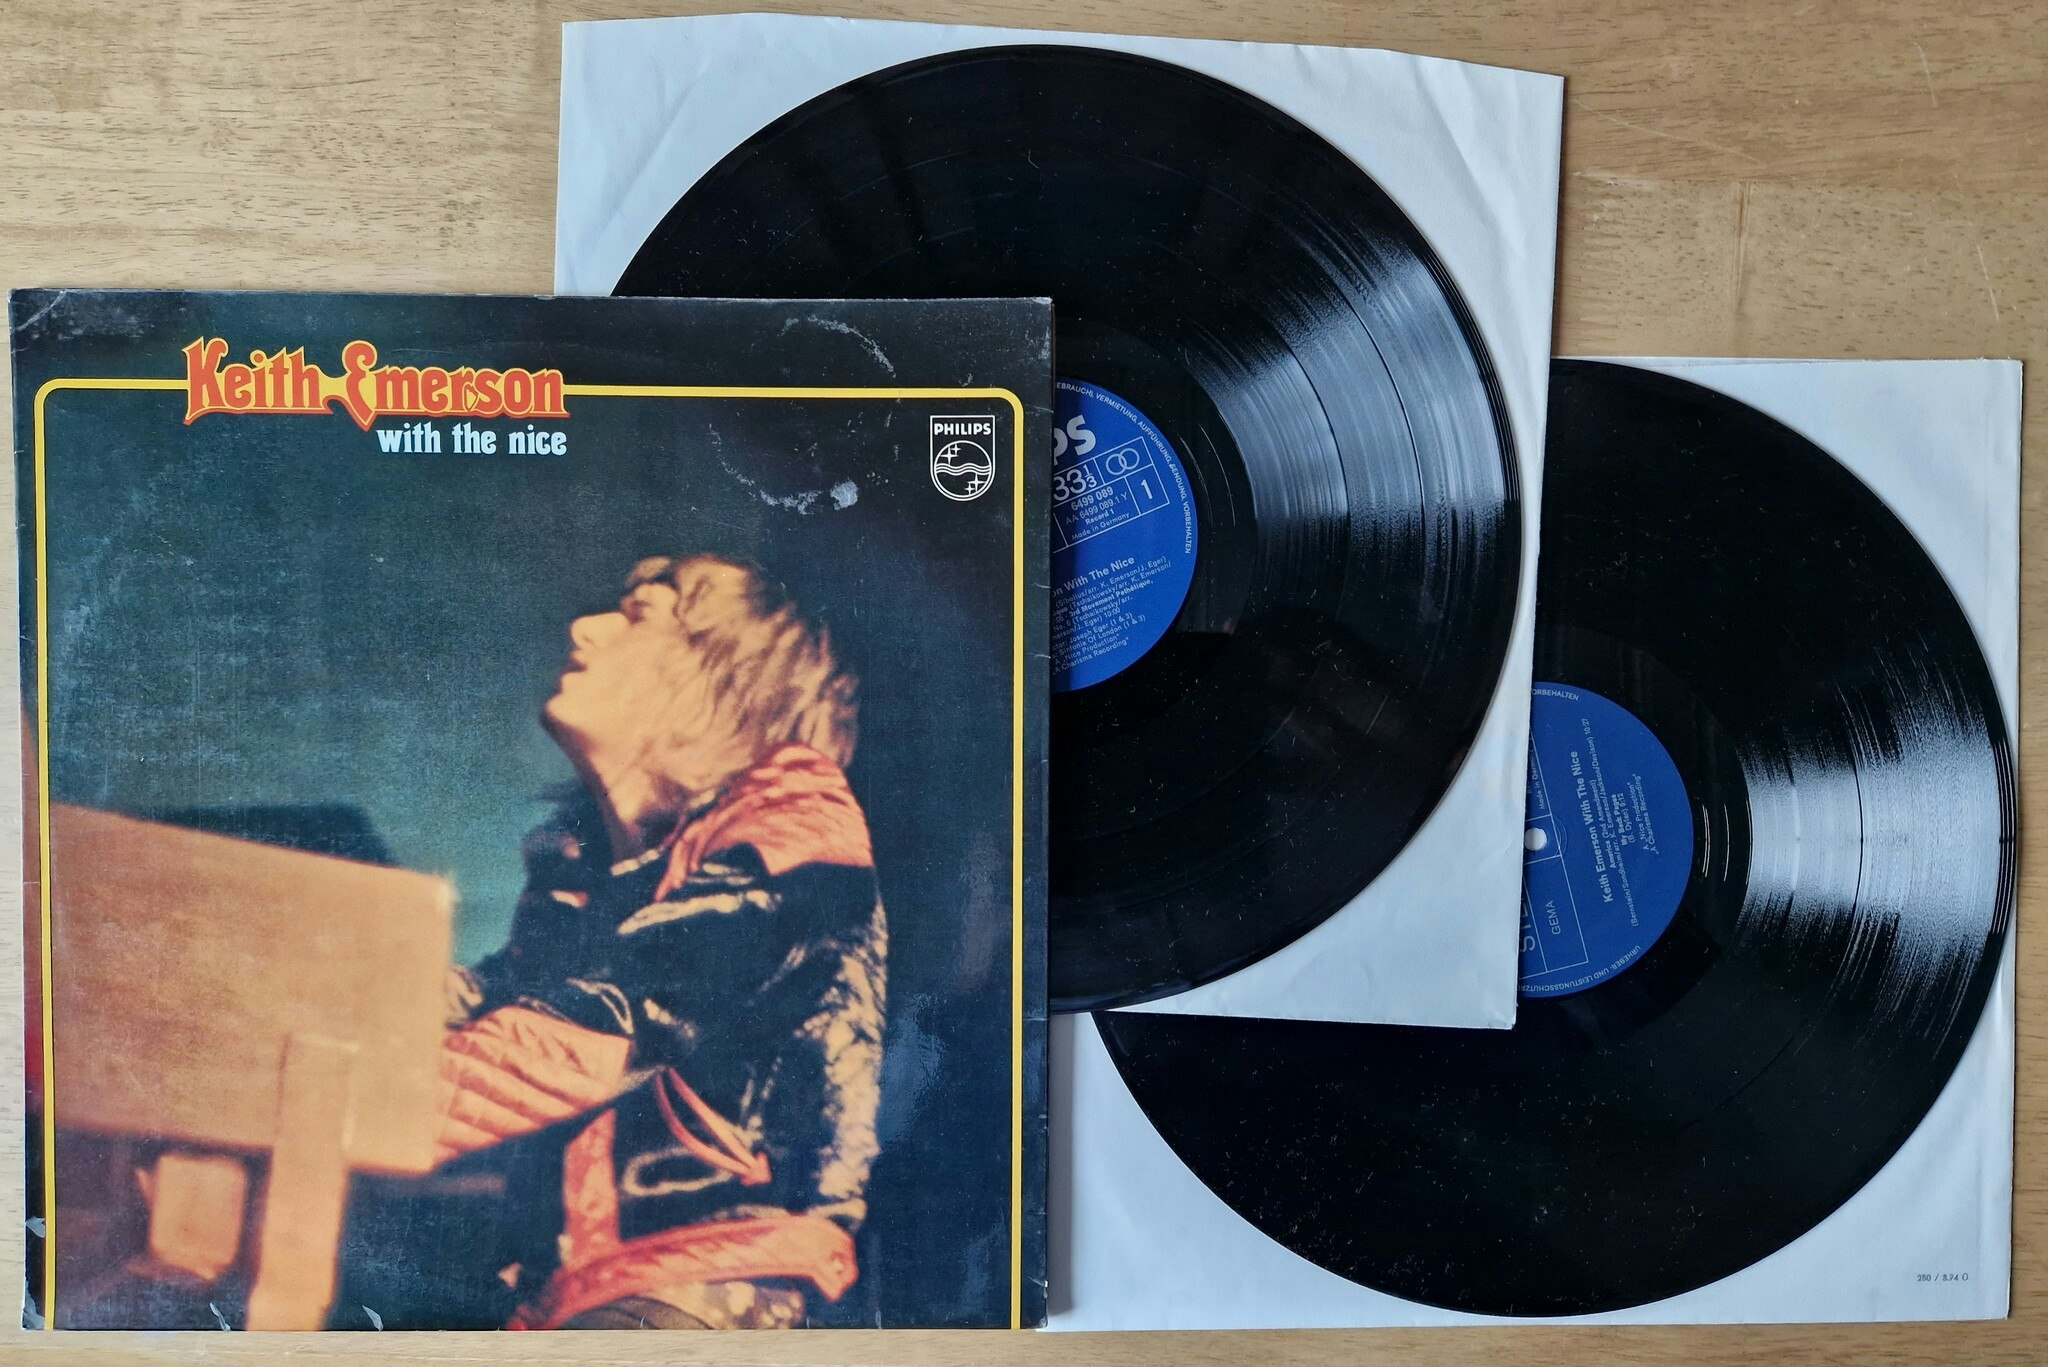 Keith Emerson with The Nice, Keith Emerson with The Nice. Vinyl 2LP